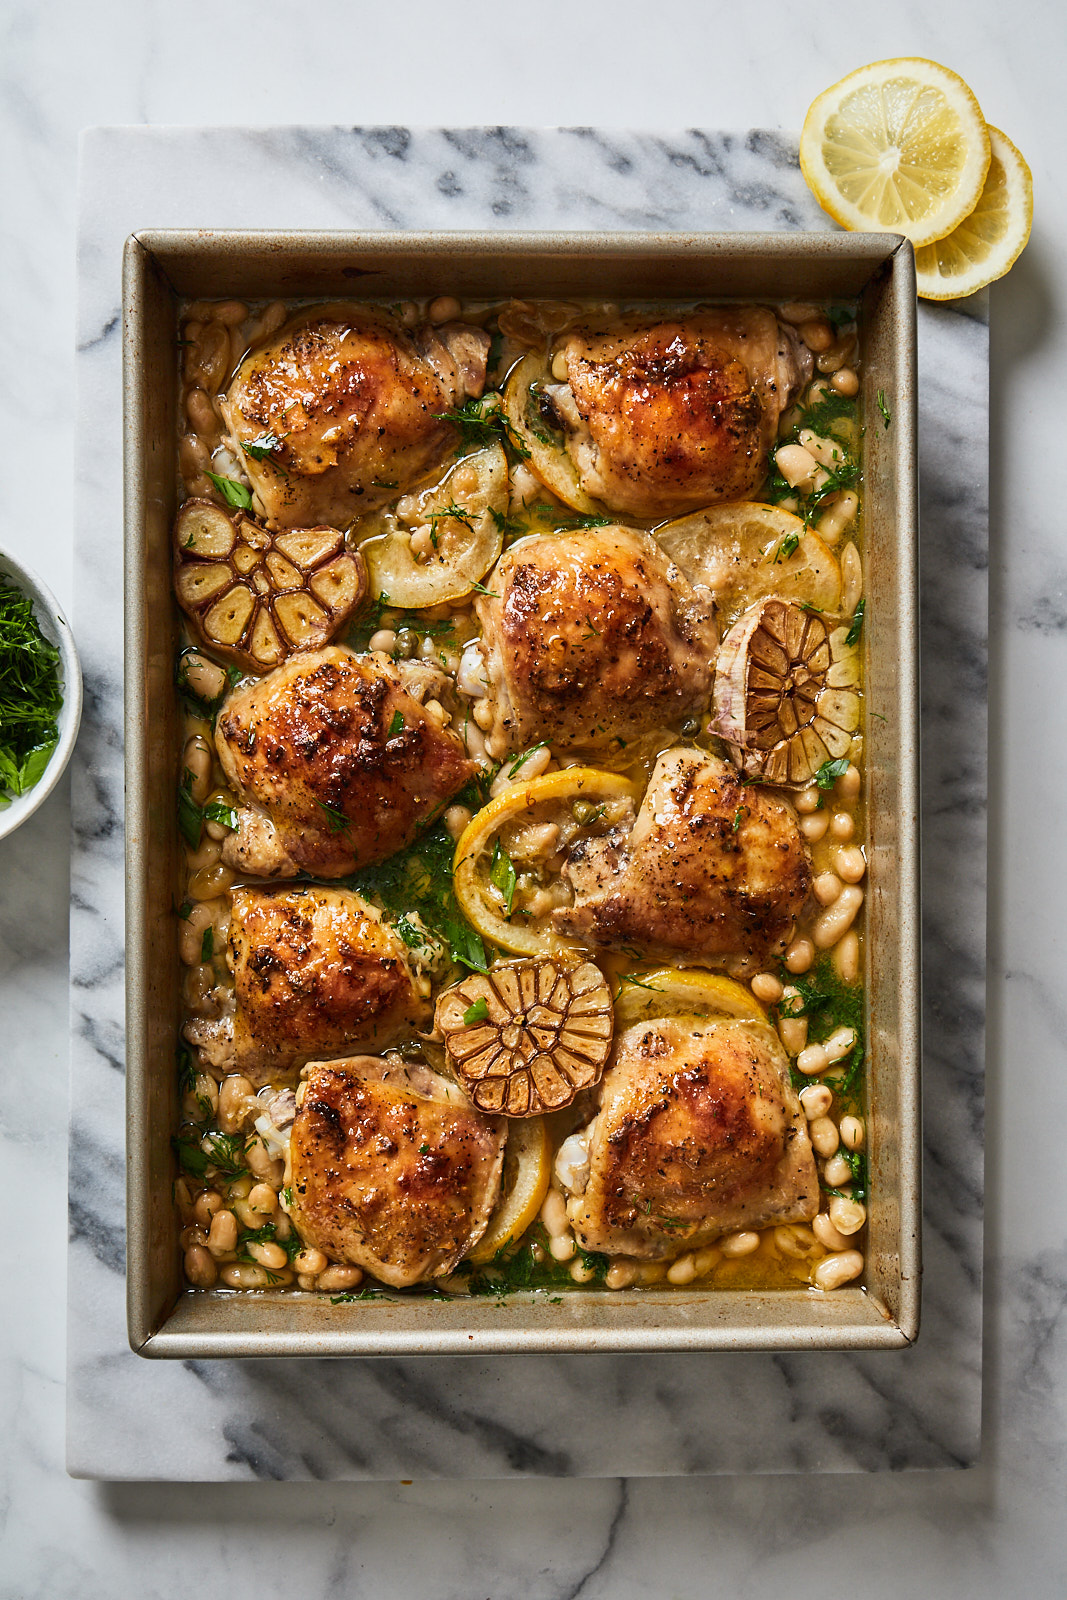 Roasted Chicken With White Beans and 20 Cloves of Garlic